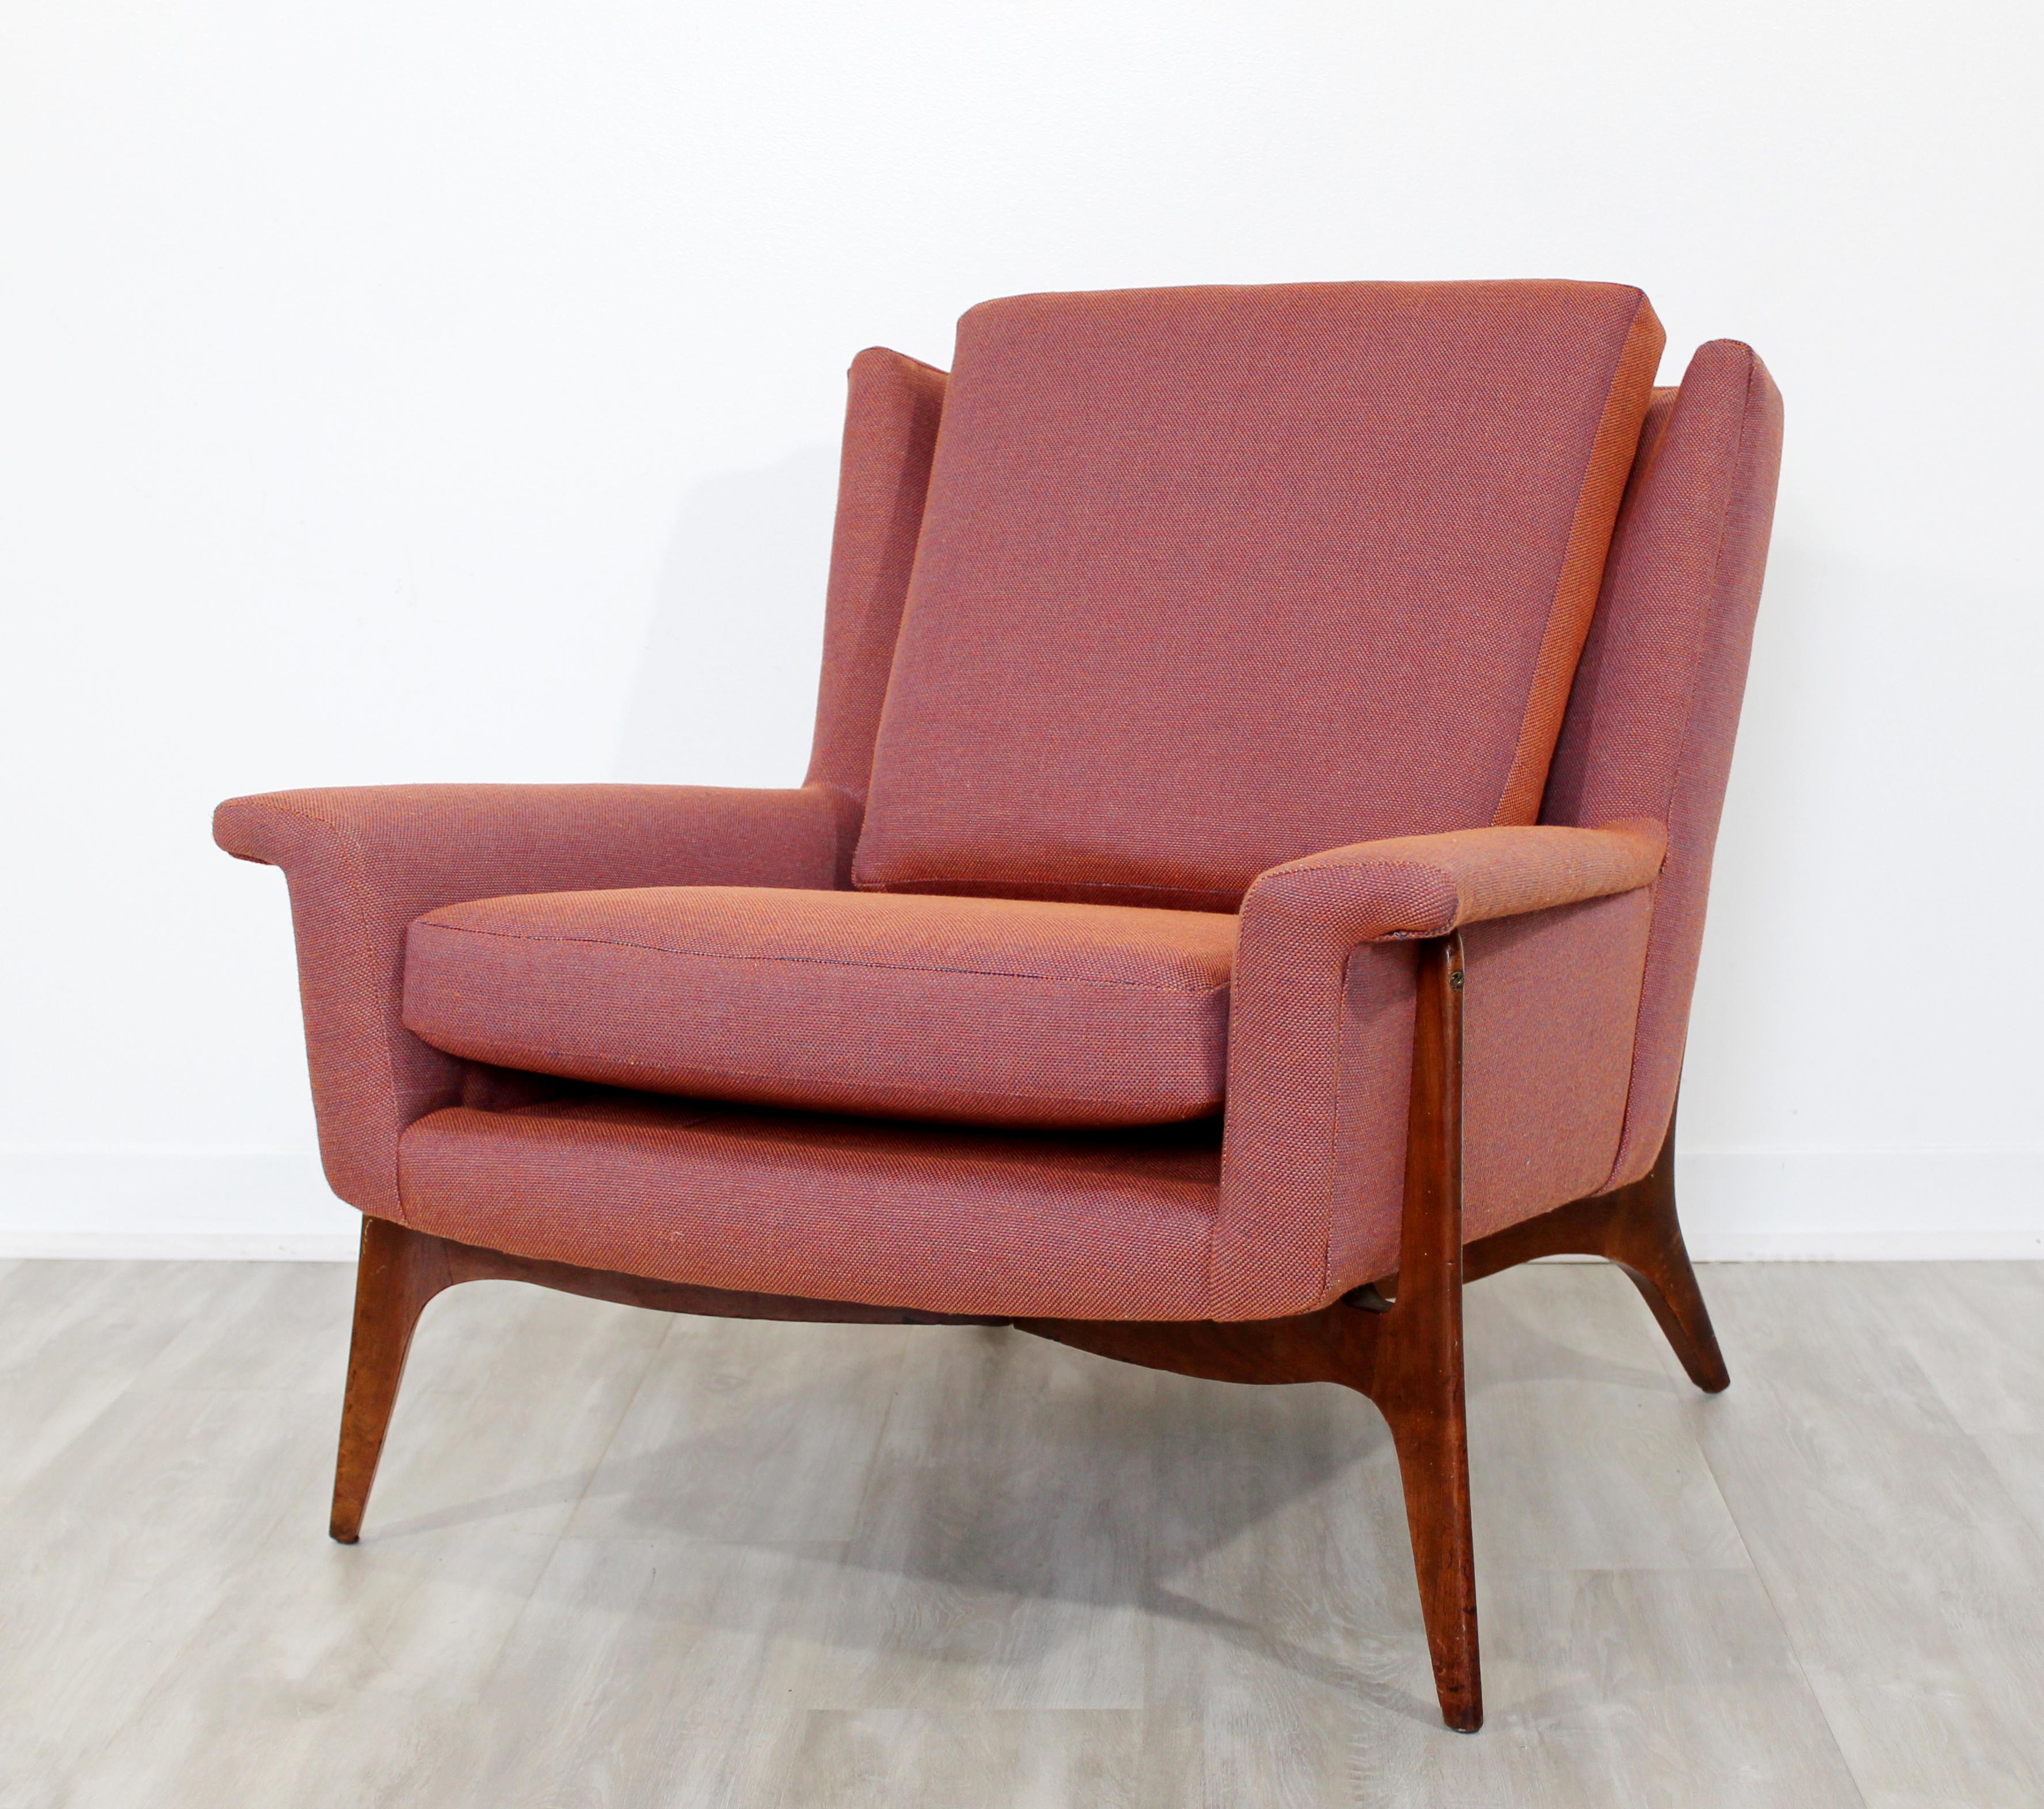 For your consideration is a stunningly angled, lounge armchair, with a wood base and new upholstery, lounge chair, circa the 1950s. In excellent vintage condition. The dimensions are 31.5